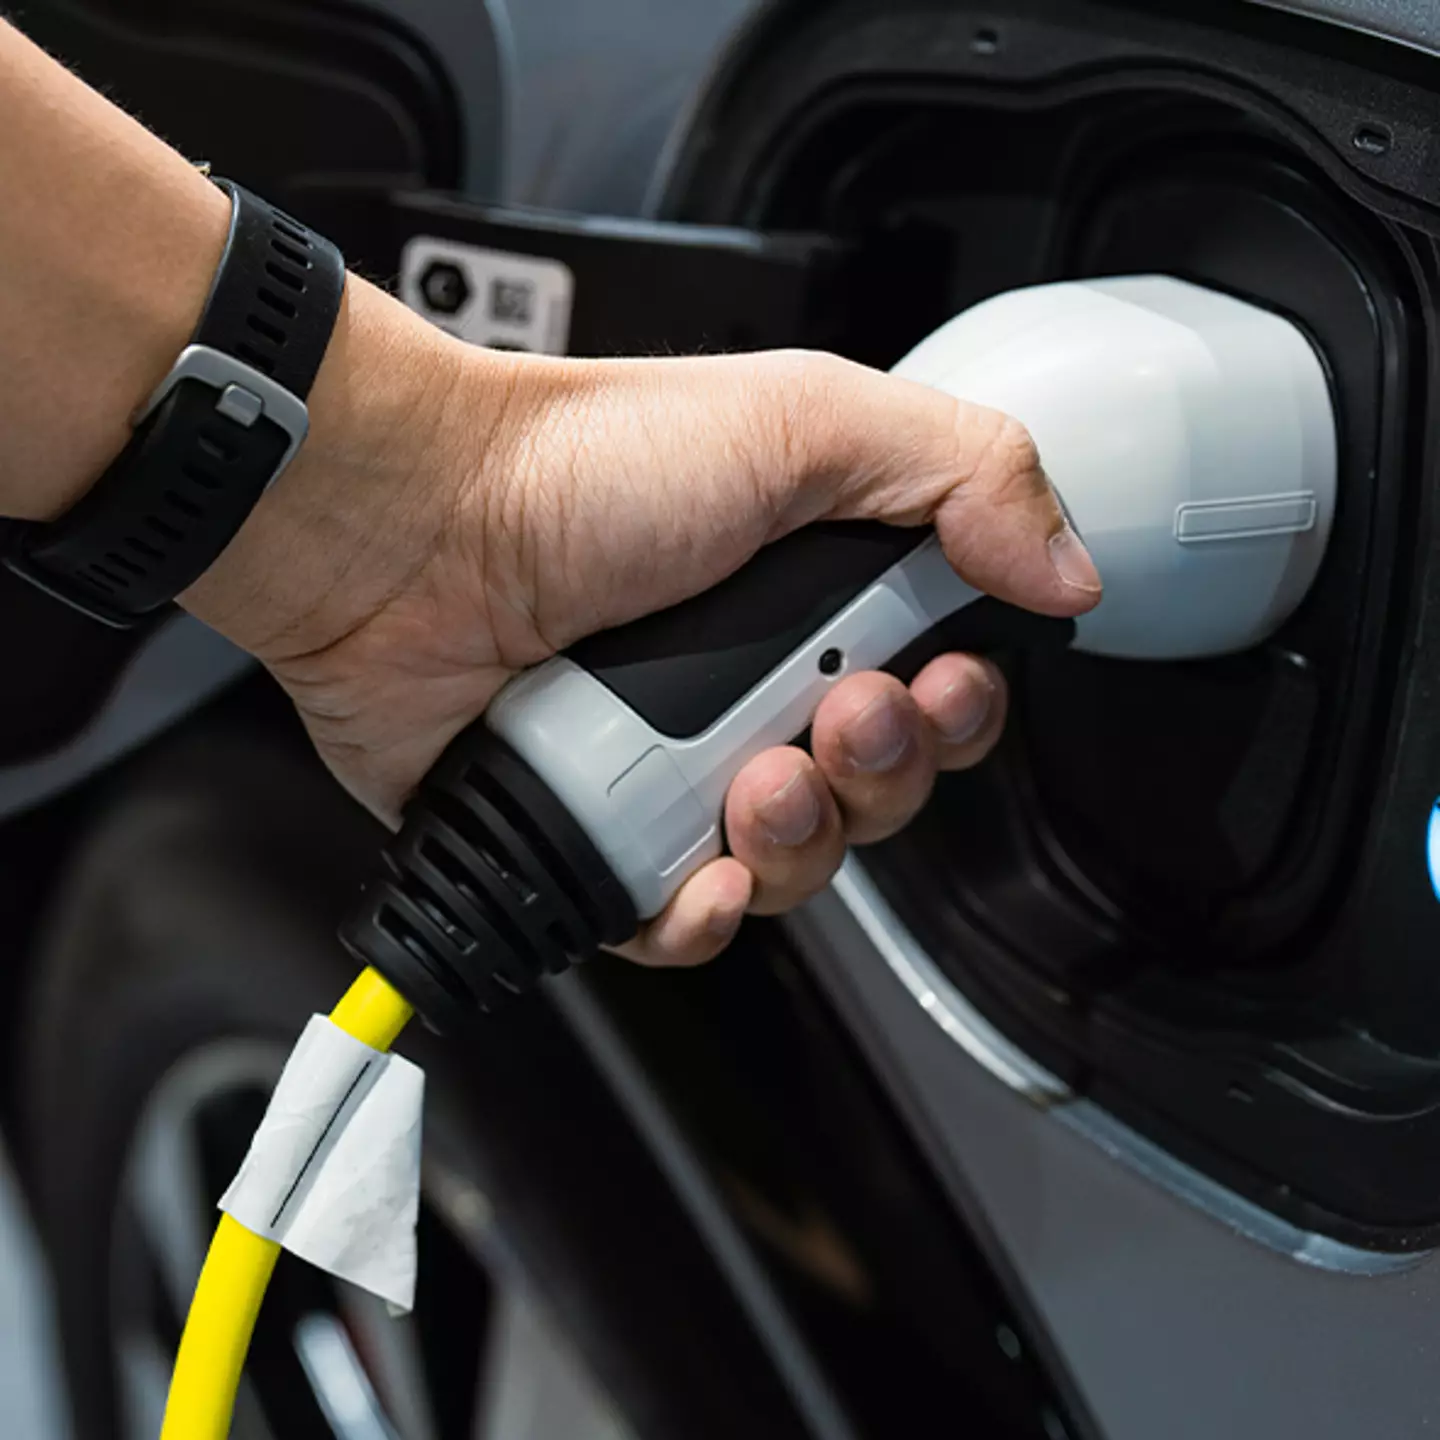 Electric vehicle owners could save 'hundreds of pounds' using EV batteries to power appliances